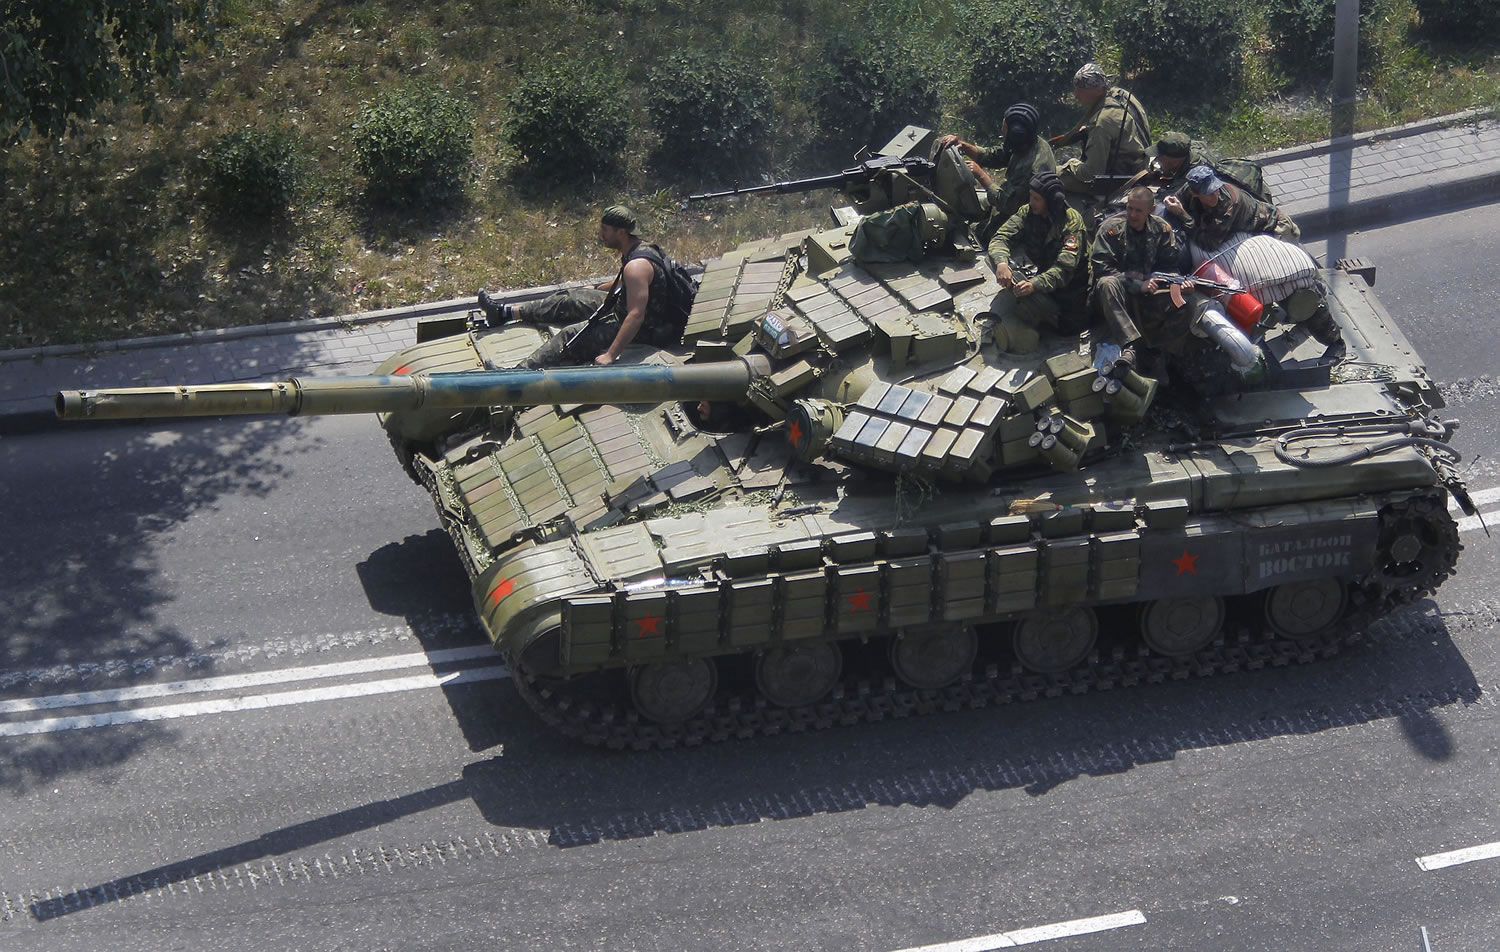 Pro-Russian rebels on a tank drive on a road in Donetsk, eastern Ukraine on Sunday.